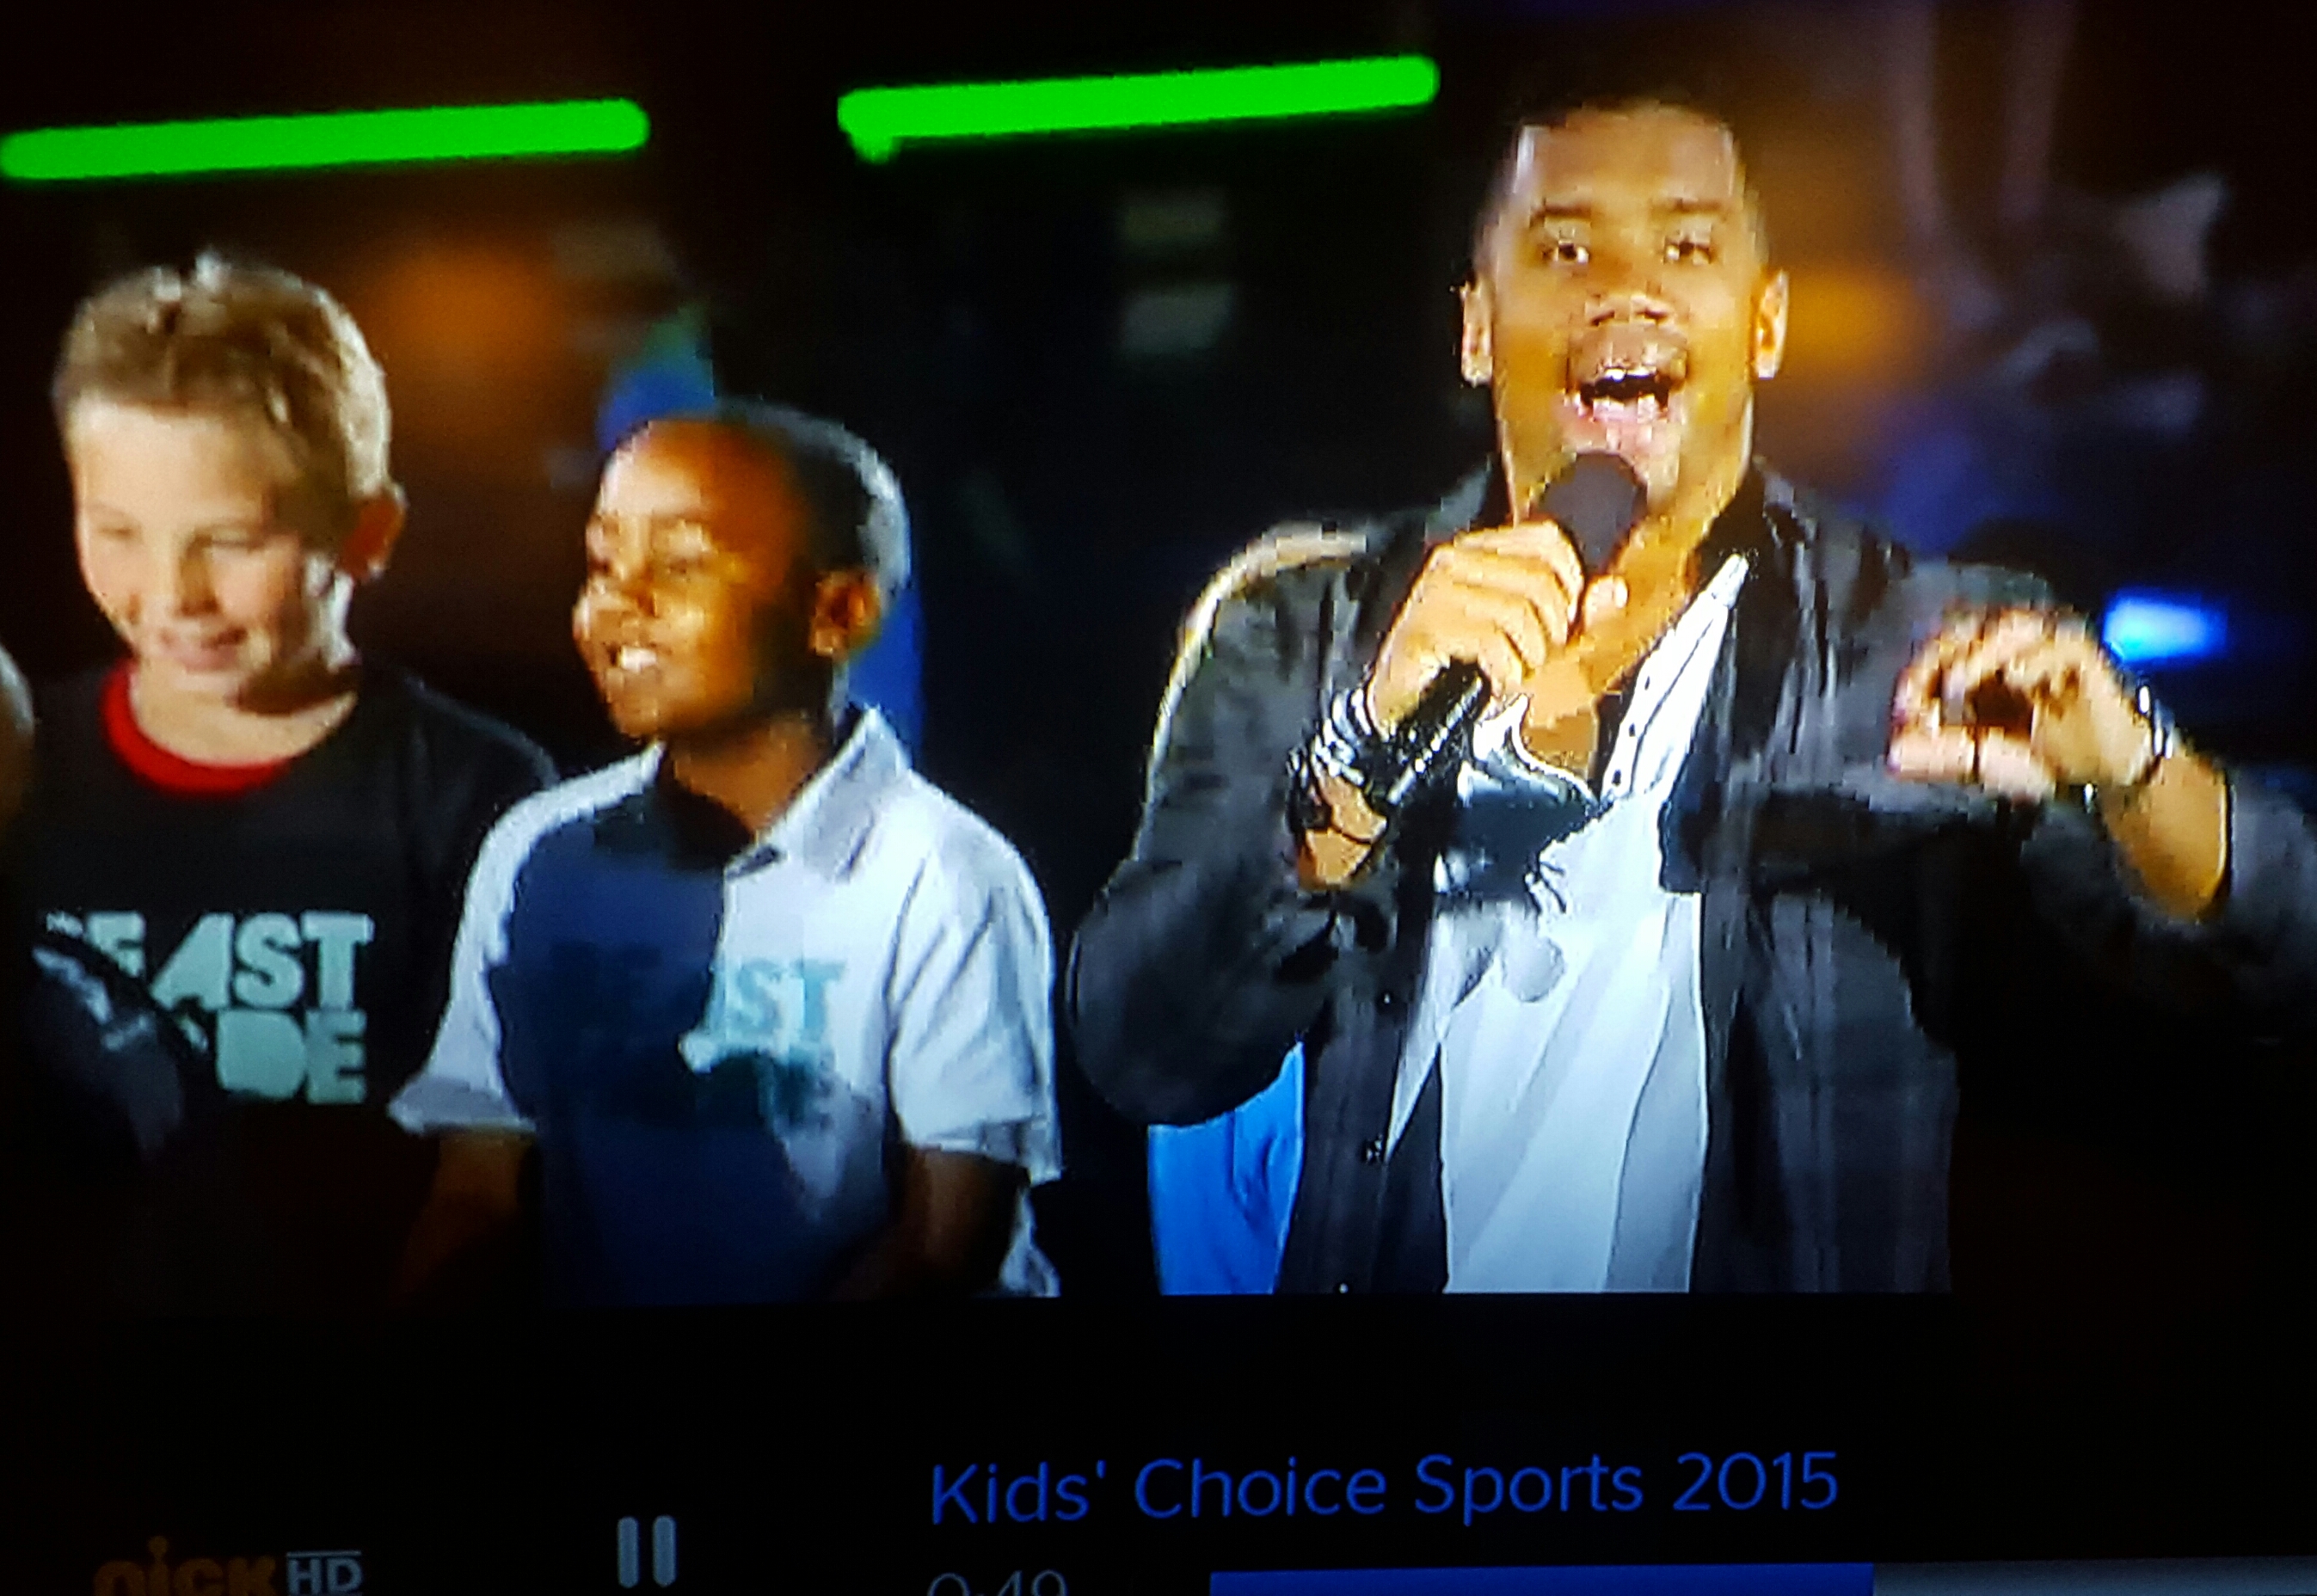 Brayden as Marshawn Lynch Challenging Boy on the Kids Choice Sports Awards 2015